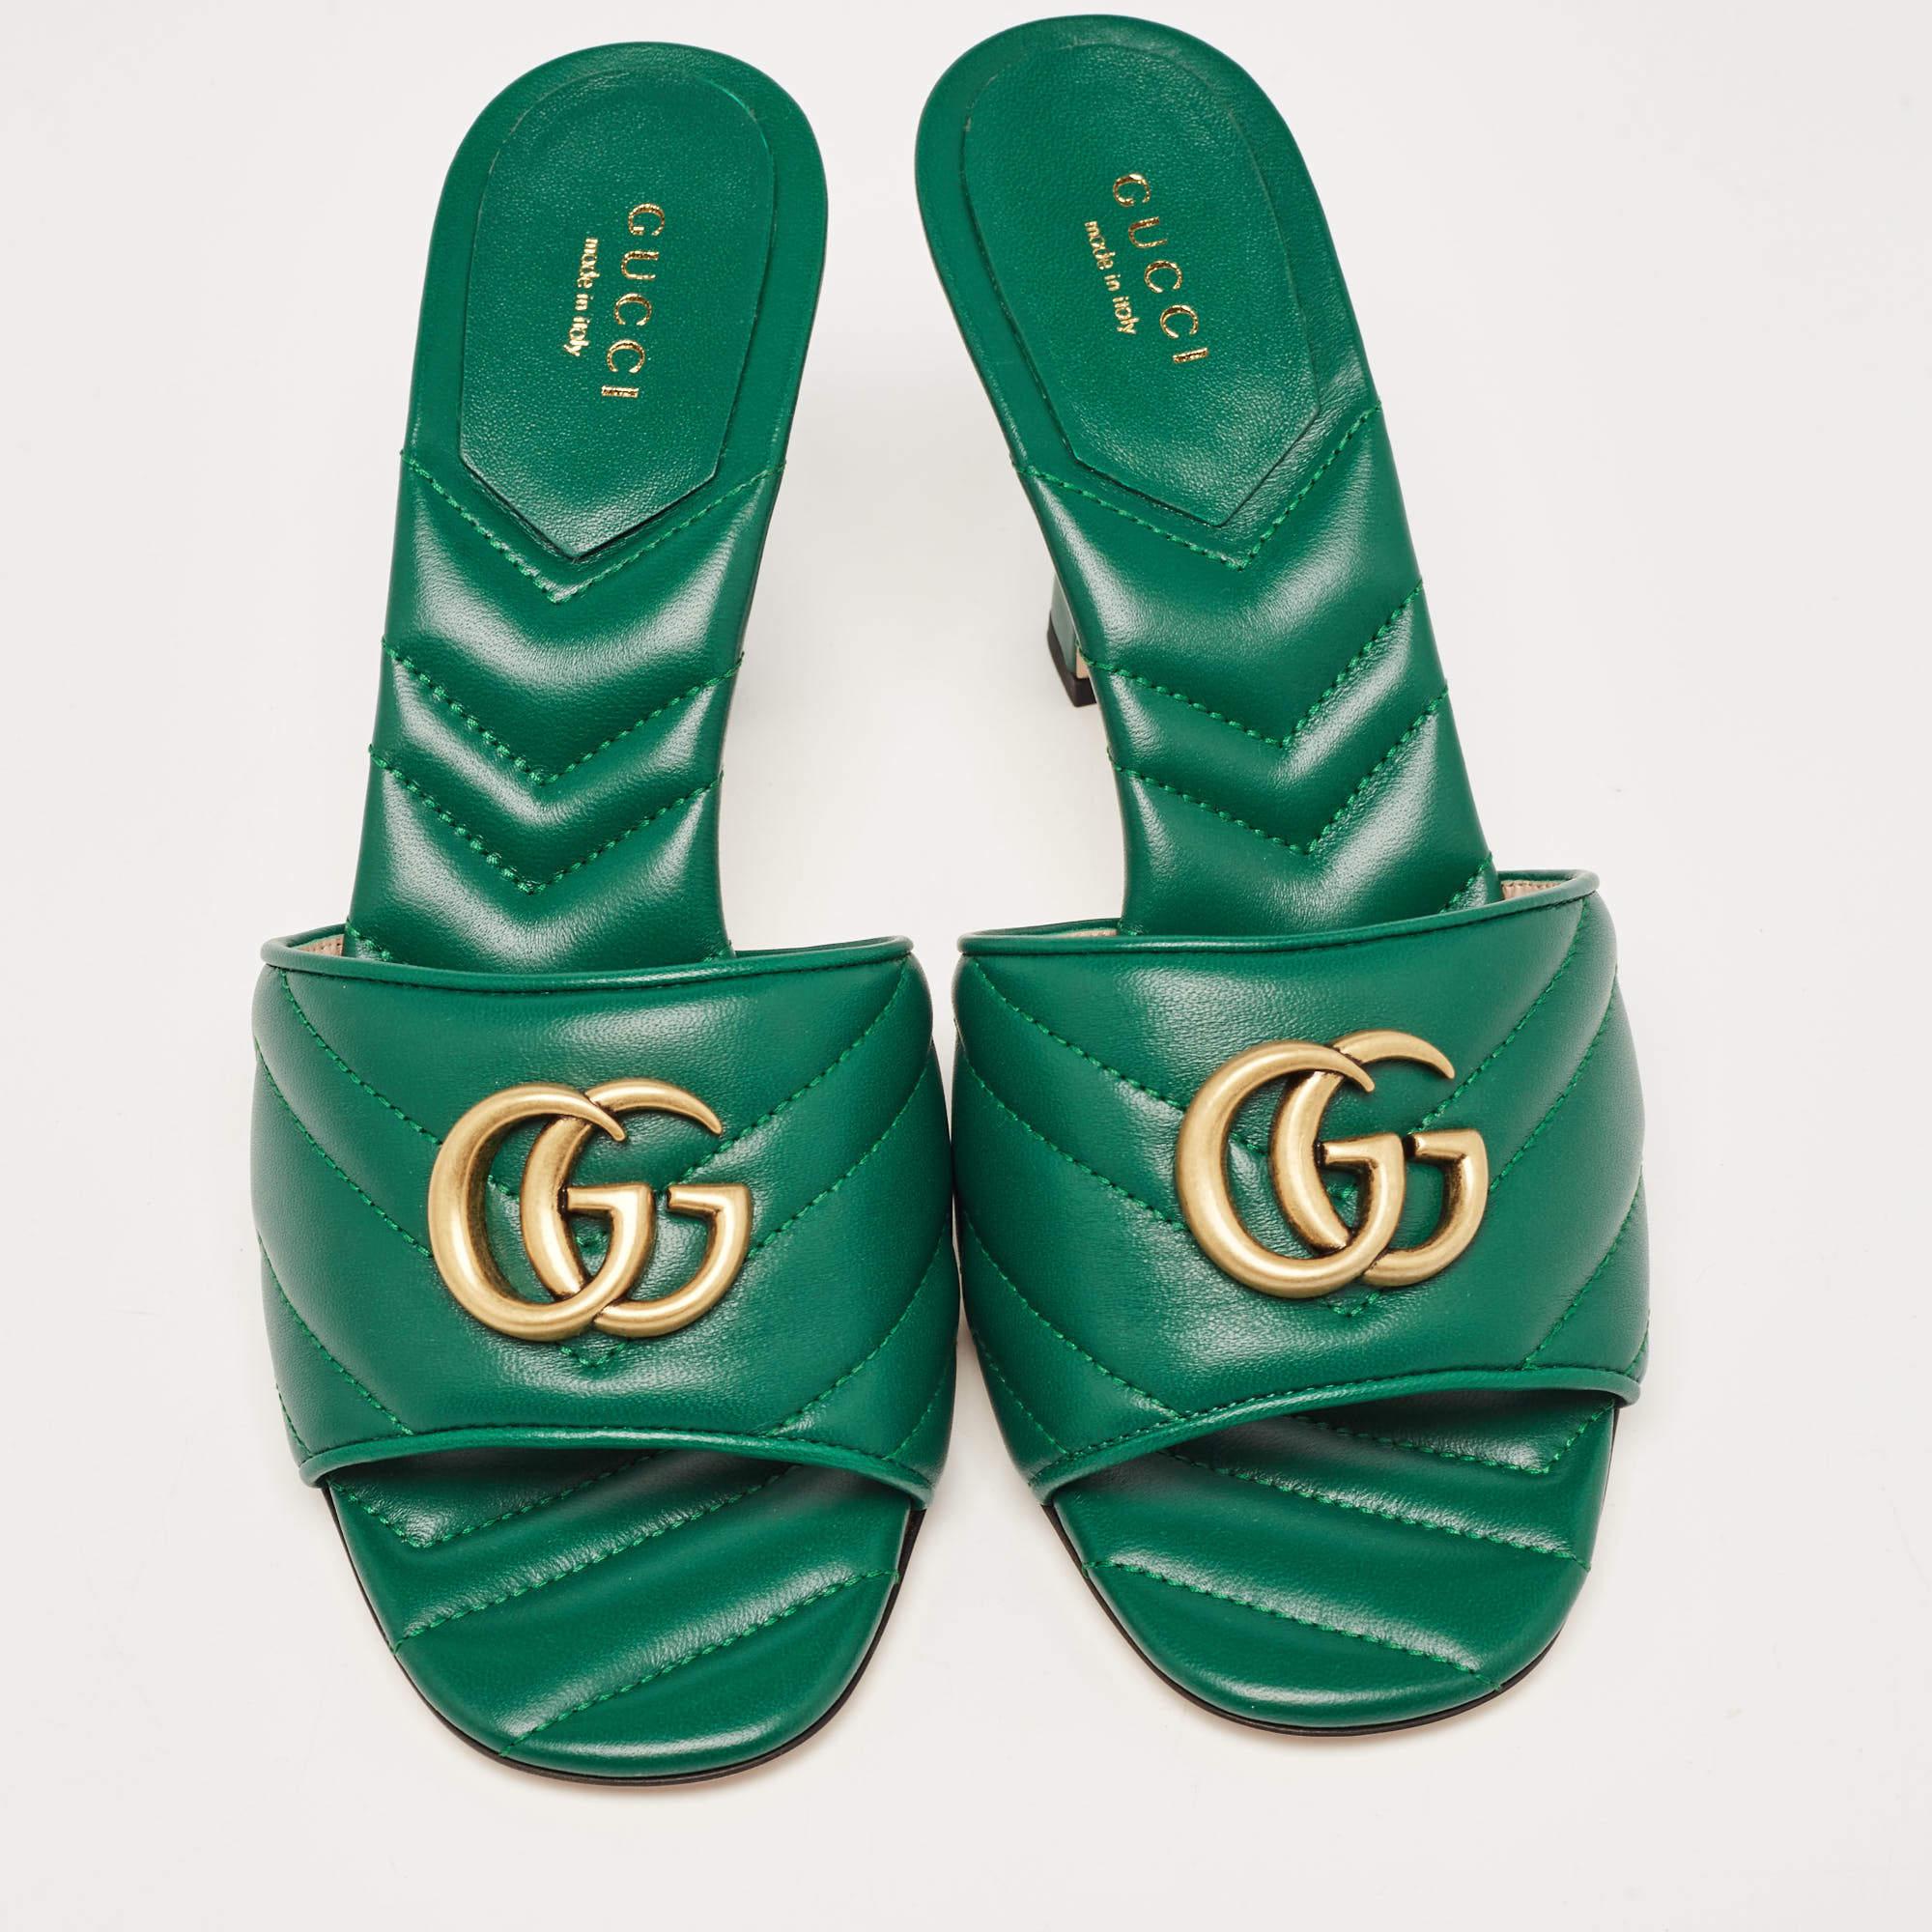 These timeless Gucci slides in green leather are meant to last you season after season. They have a comfortable fit and high-quality finish.

Includes: Original Dustbag, Original Box, Info Booklet

